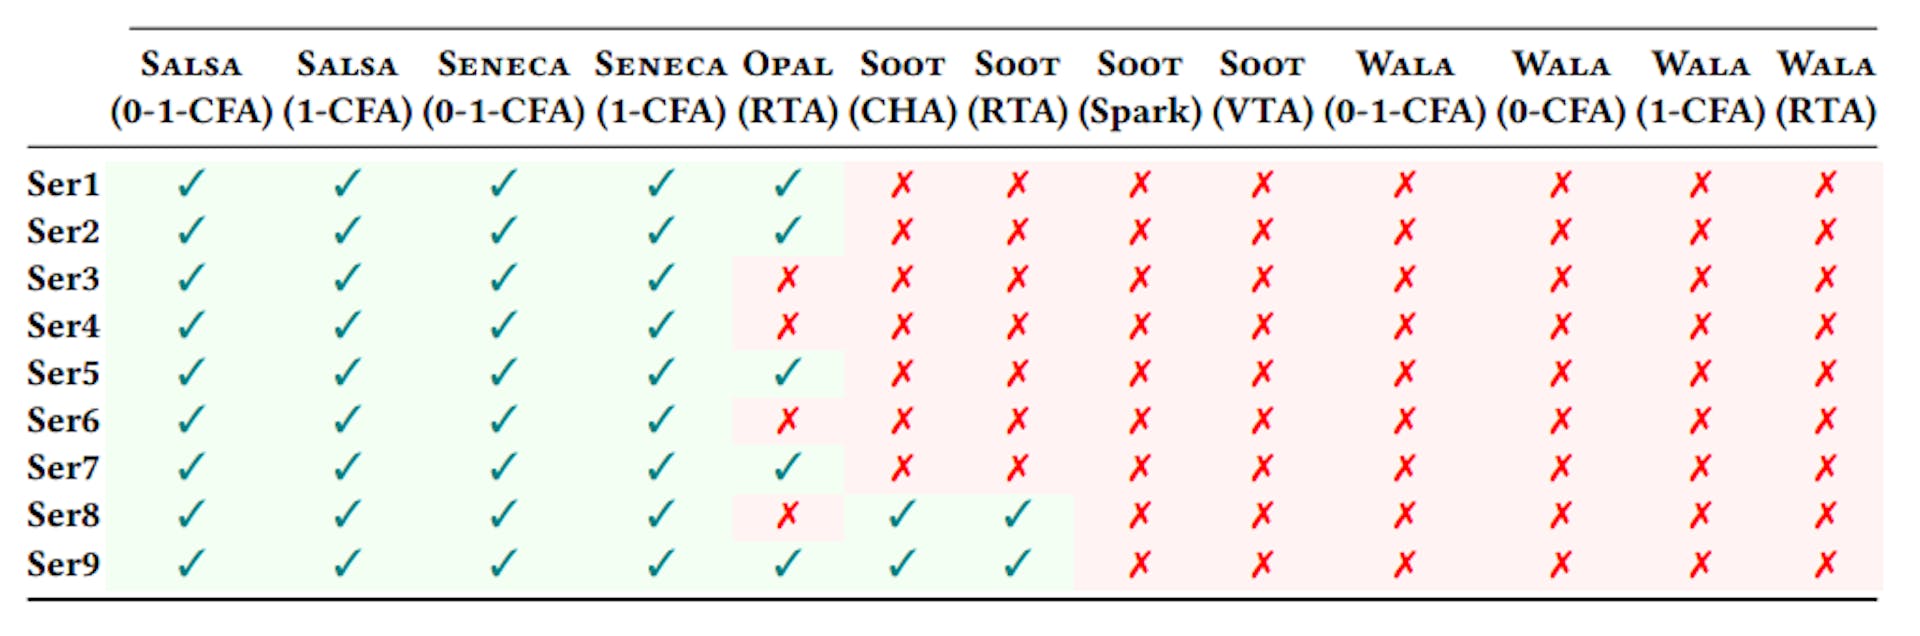 Table 4. Results from running the test cases from CATS